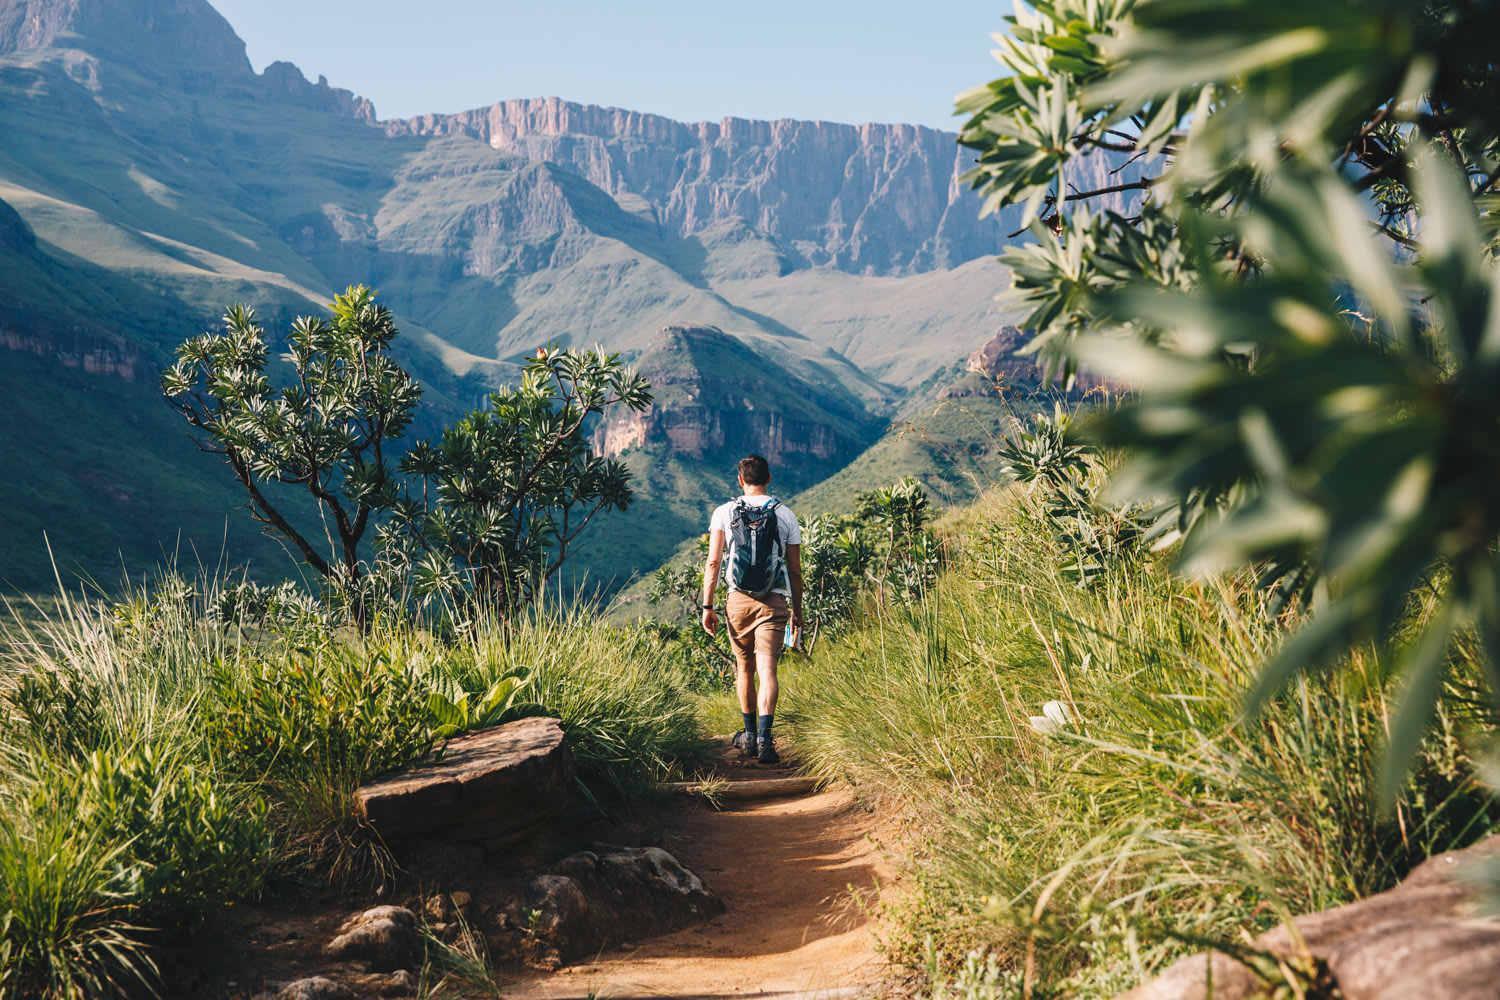 Our complete guide to the Tugela Gorge hike